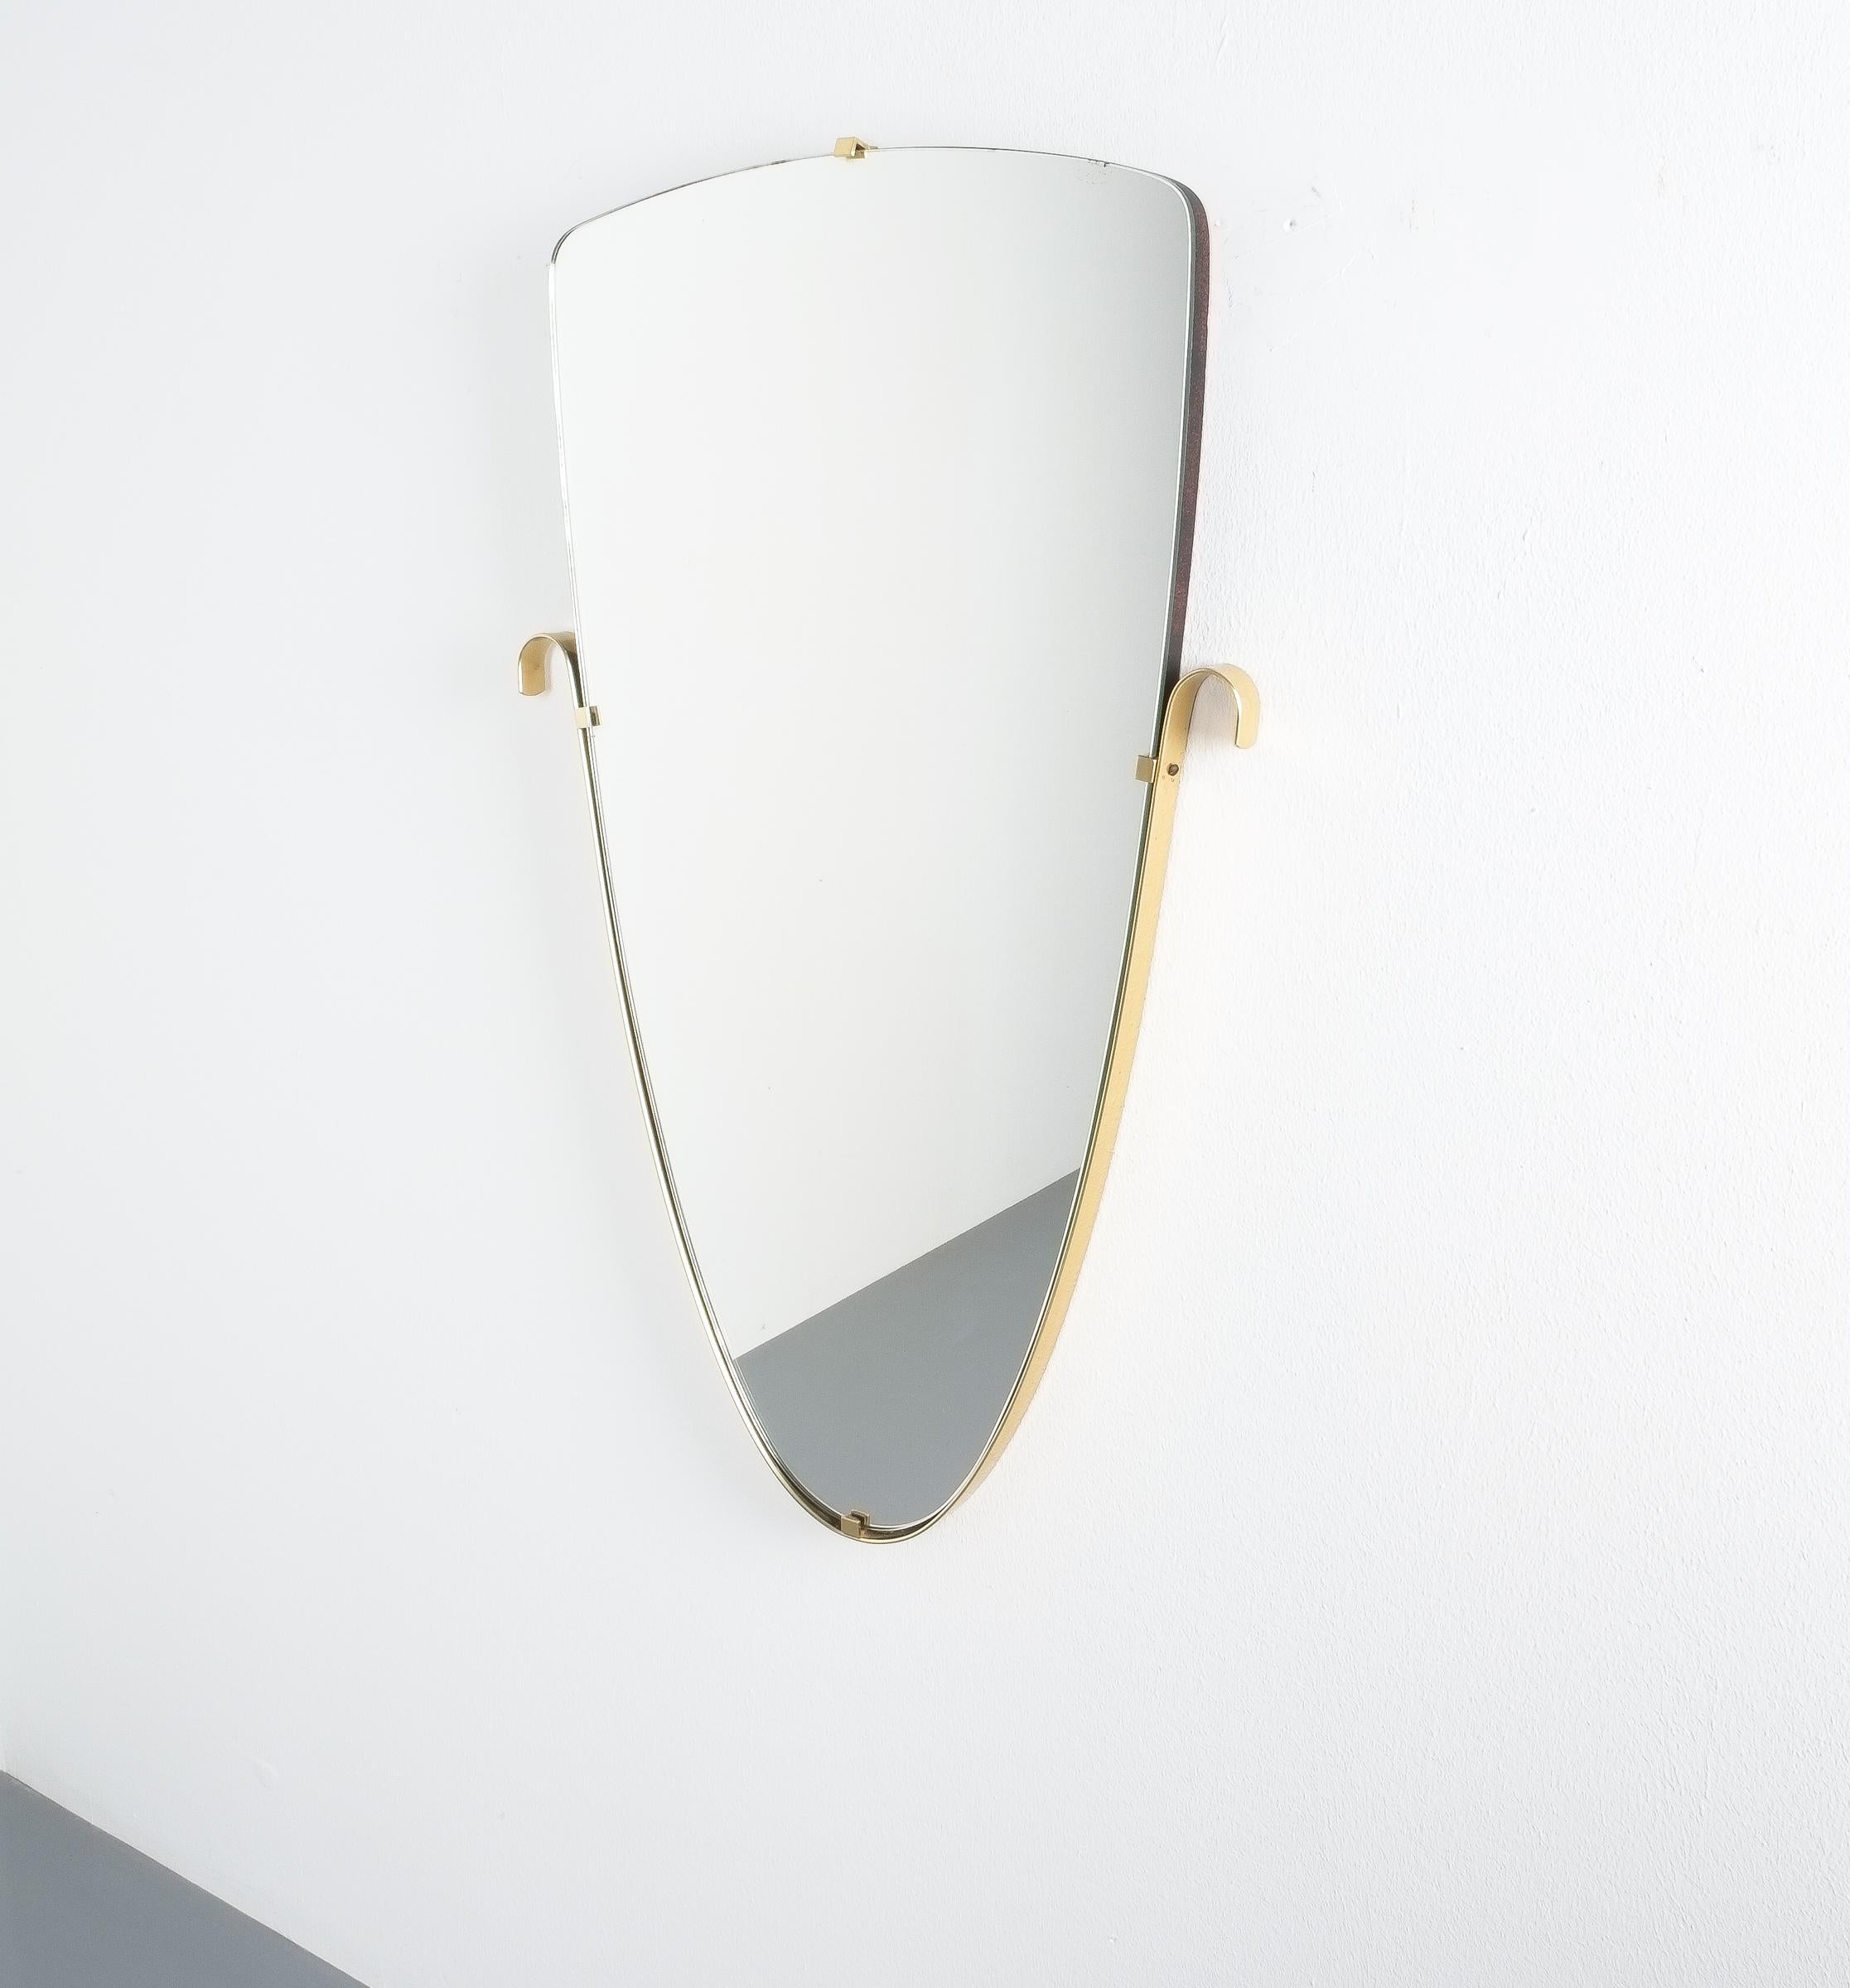 Organic mirror with brass accents, Italy, 1955. Nice wall mirror in very good condition measuring 30.3